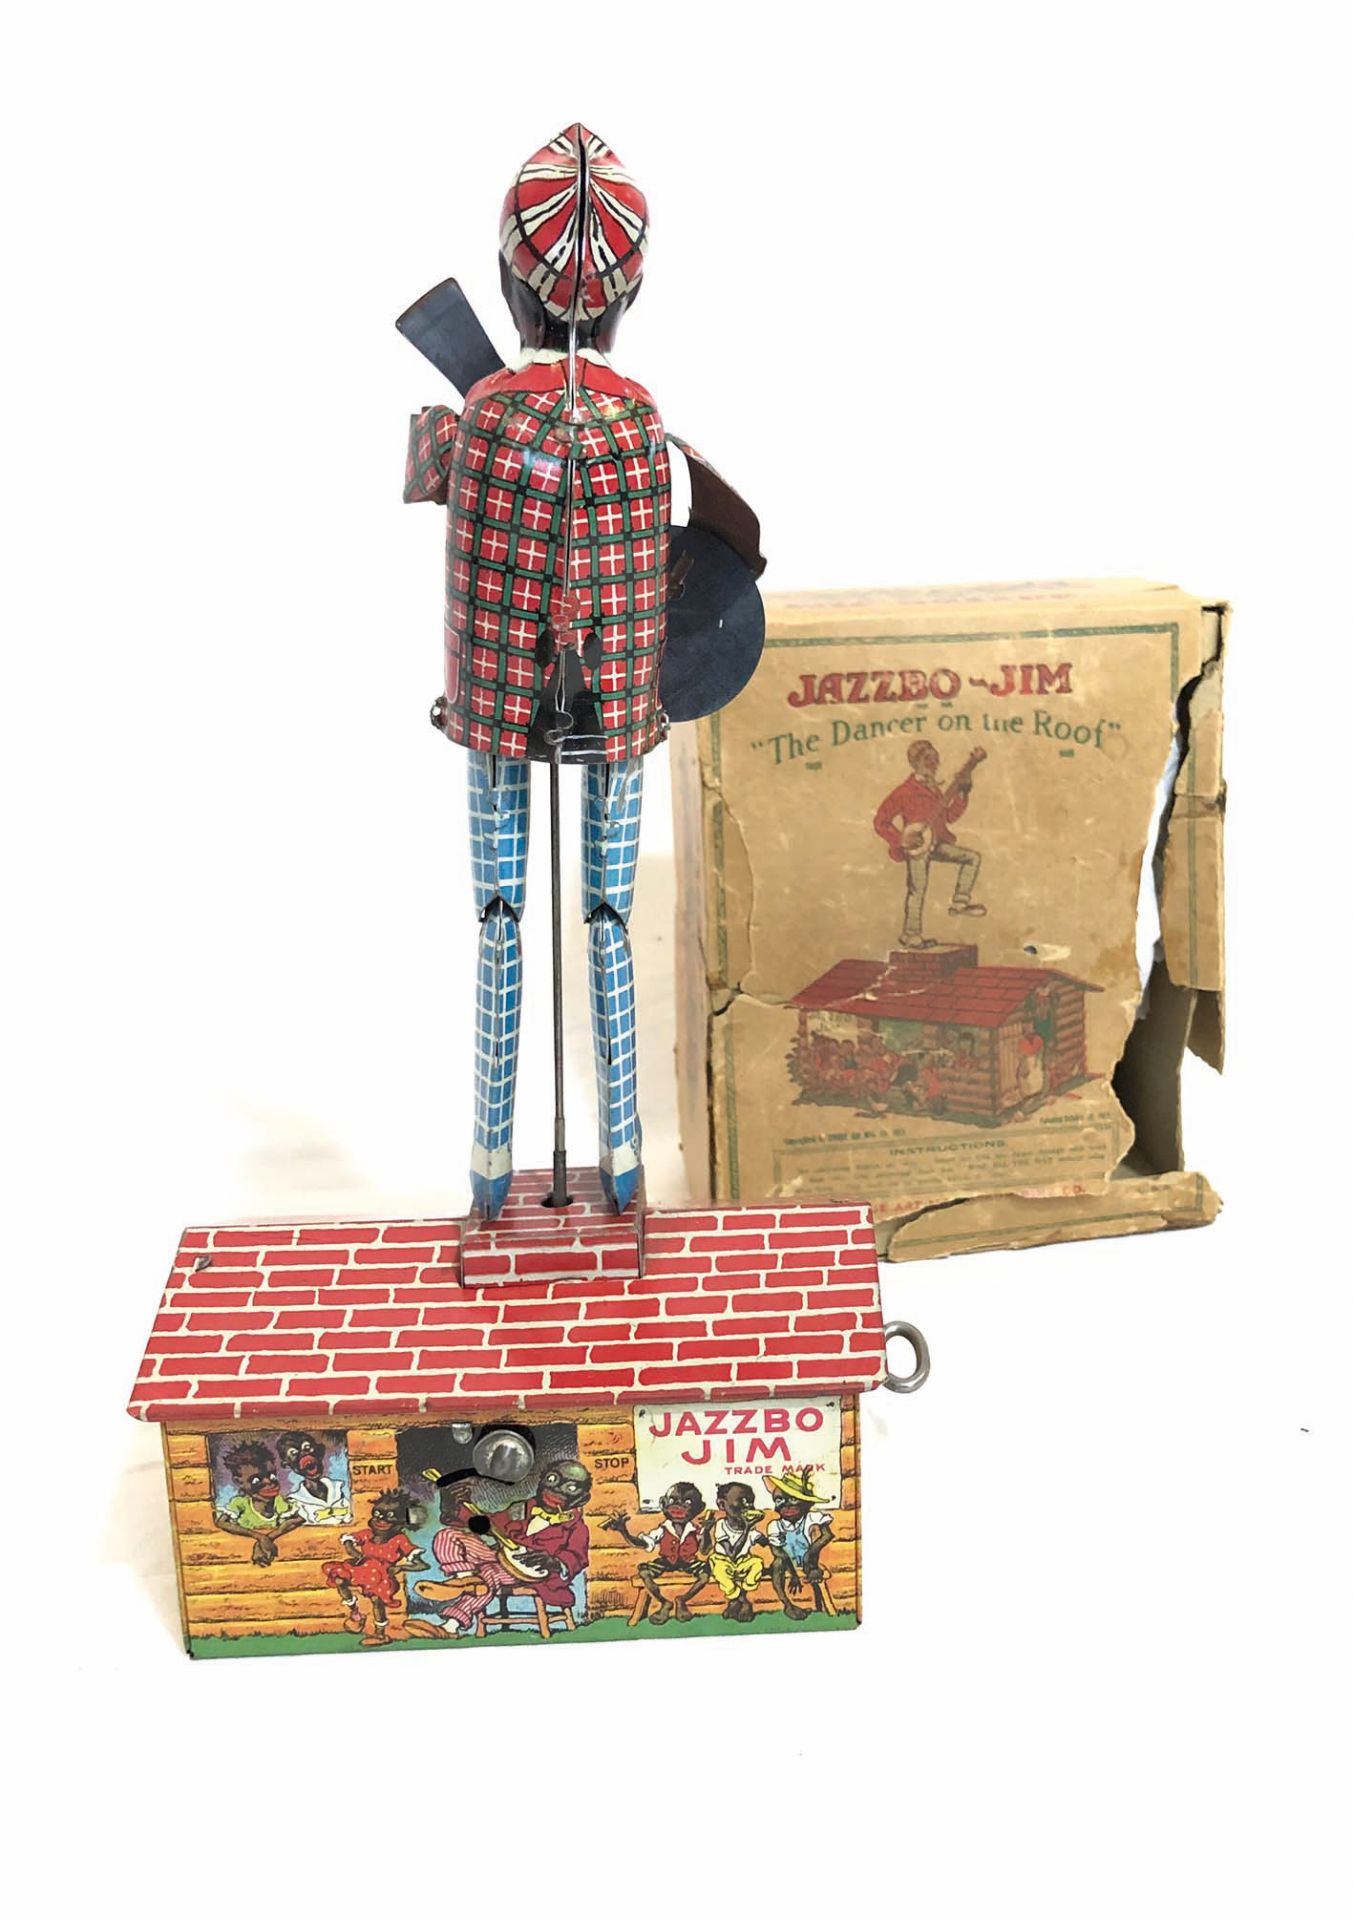 Tin toy Jazzbo Jim "The Dancer on The Roof" - Image 2 of 2